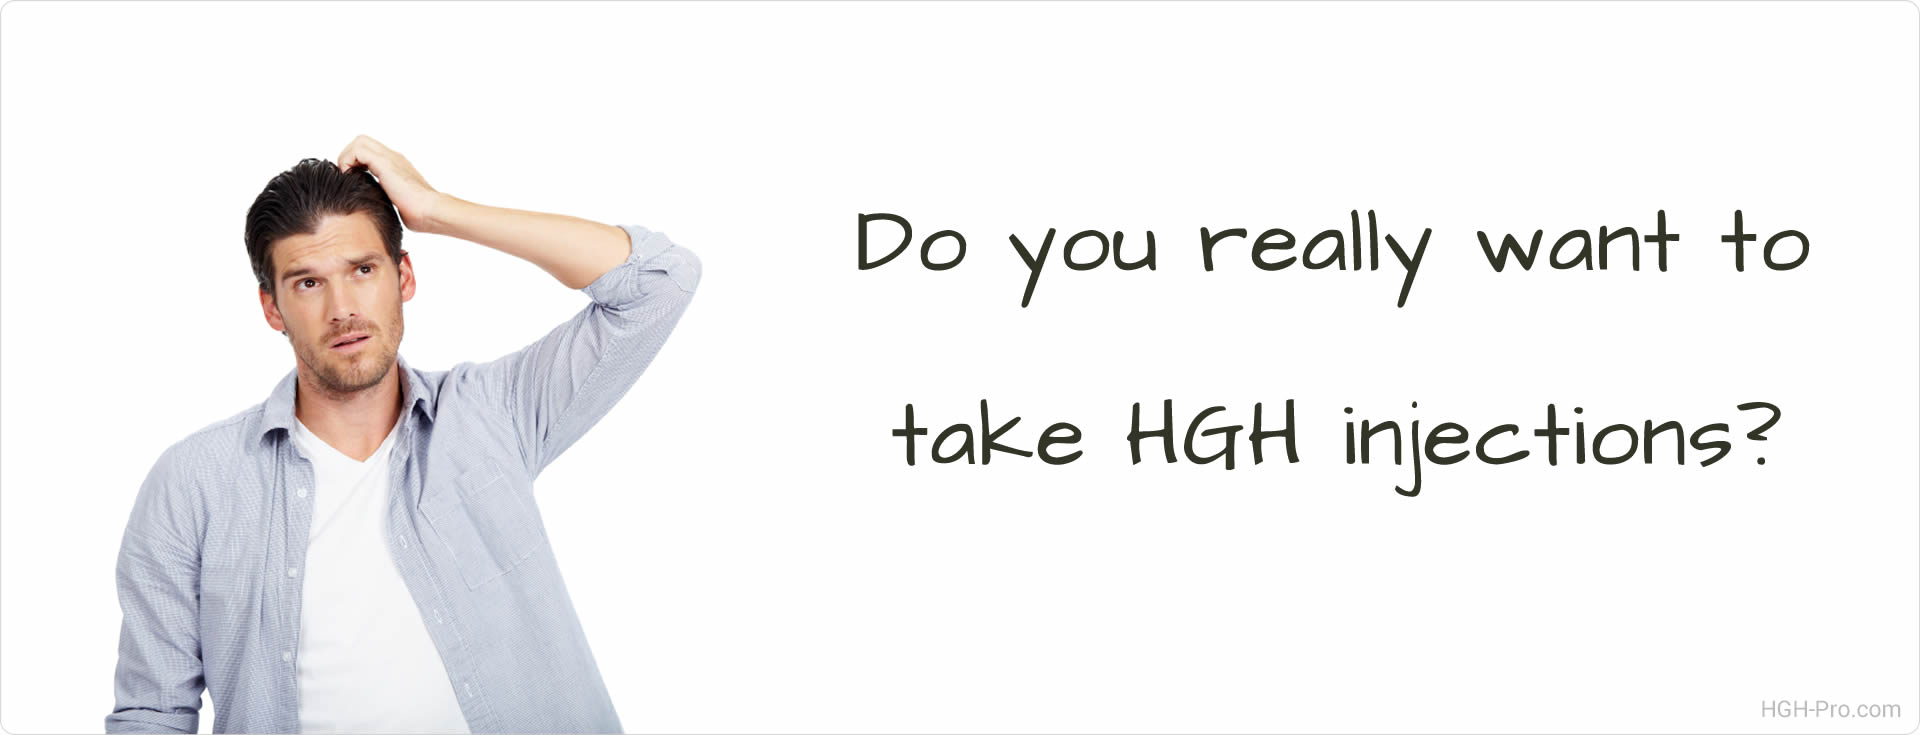 Do you want to take HGH injections?